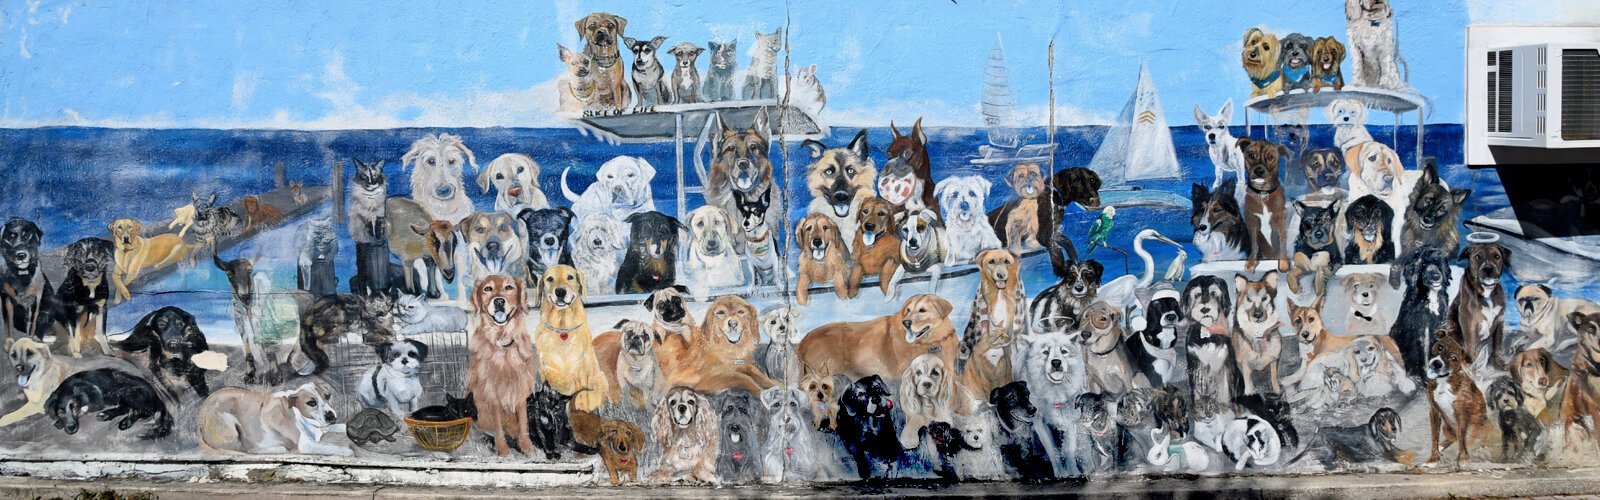 In 2010, Mural for Mutts artist Anna Hamilton started to paint hundreds of beloved pets, dogs and cats on Dunedin walls as a fundraiser for Dunedin Doggie Rescue, a local pet rescue. 